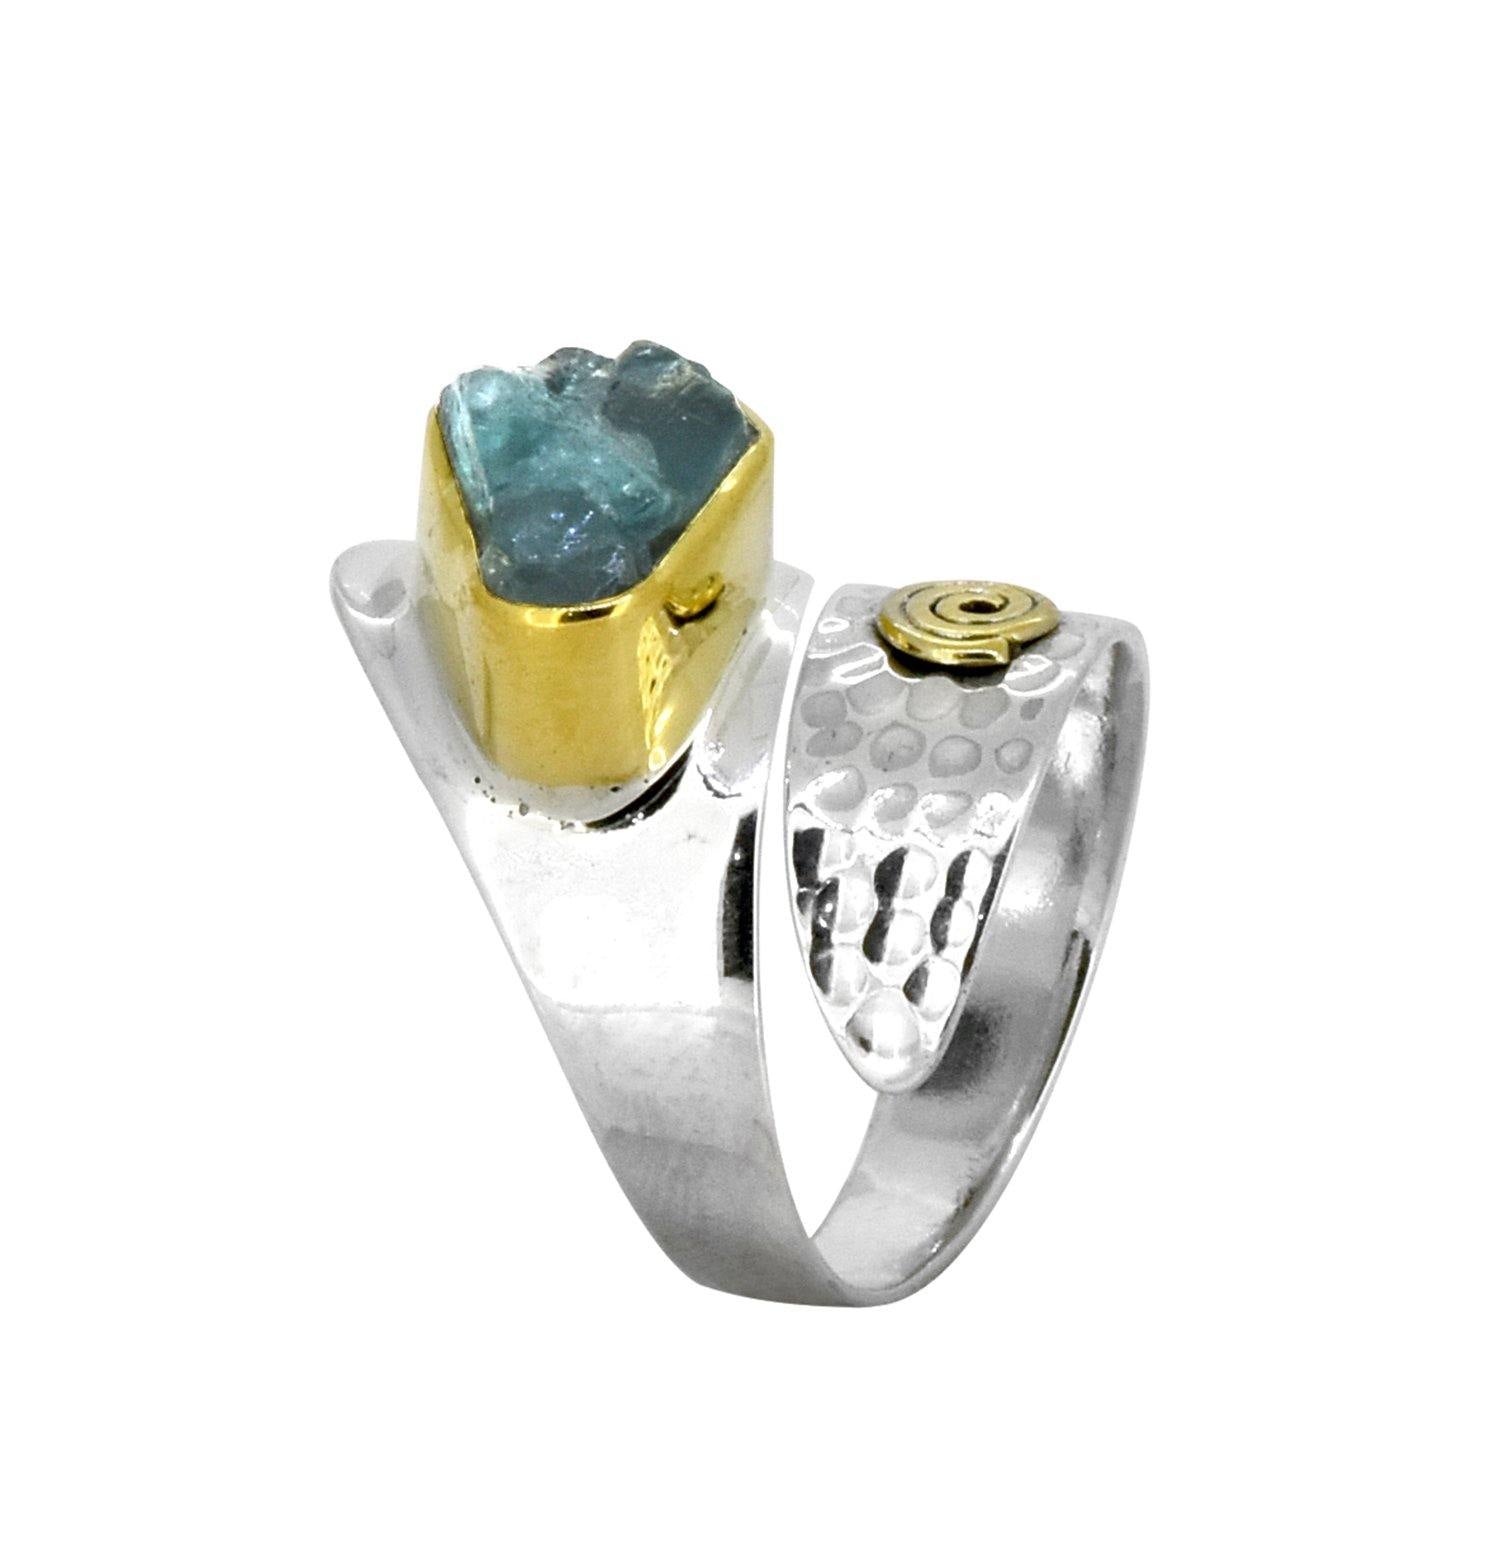 Rough Neon Apatite Solid 925 Sterling Silver Ring Jewelry - YoTreasure